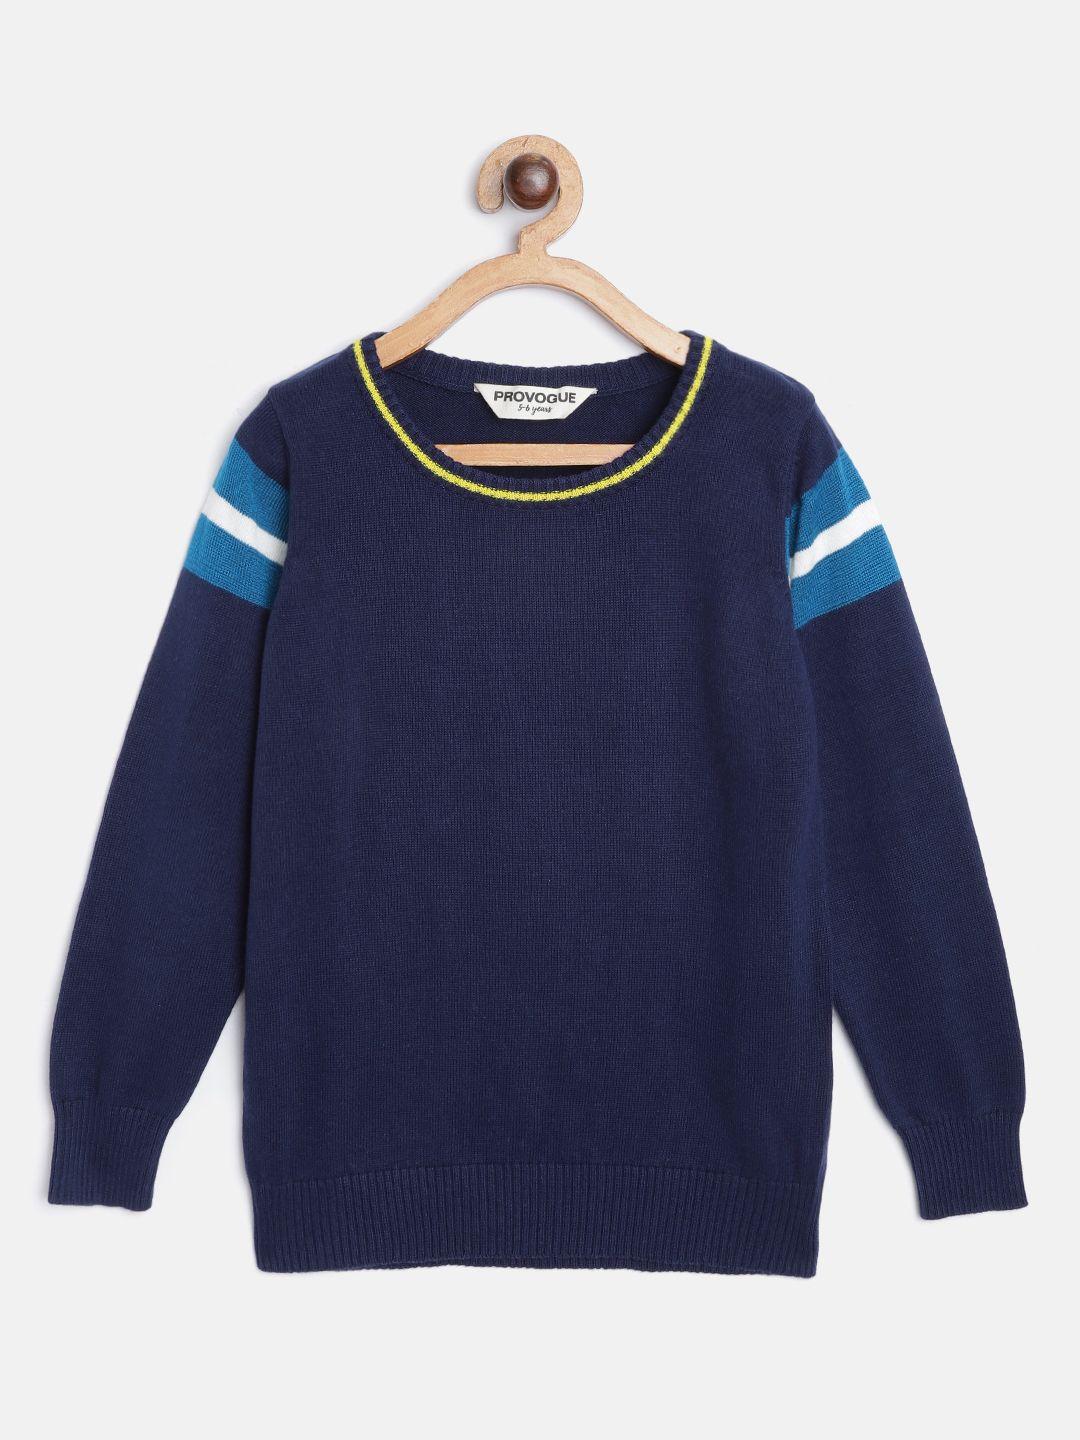 provogue-boys-navy-blue-cotton-solid-sweater